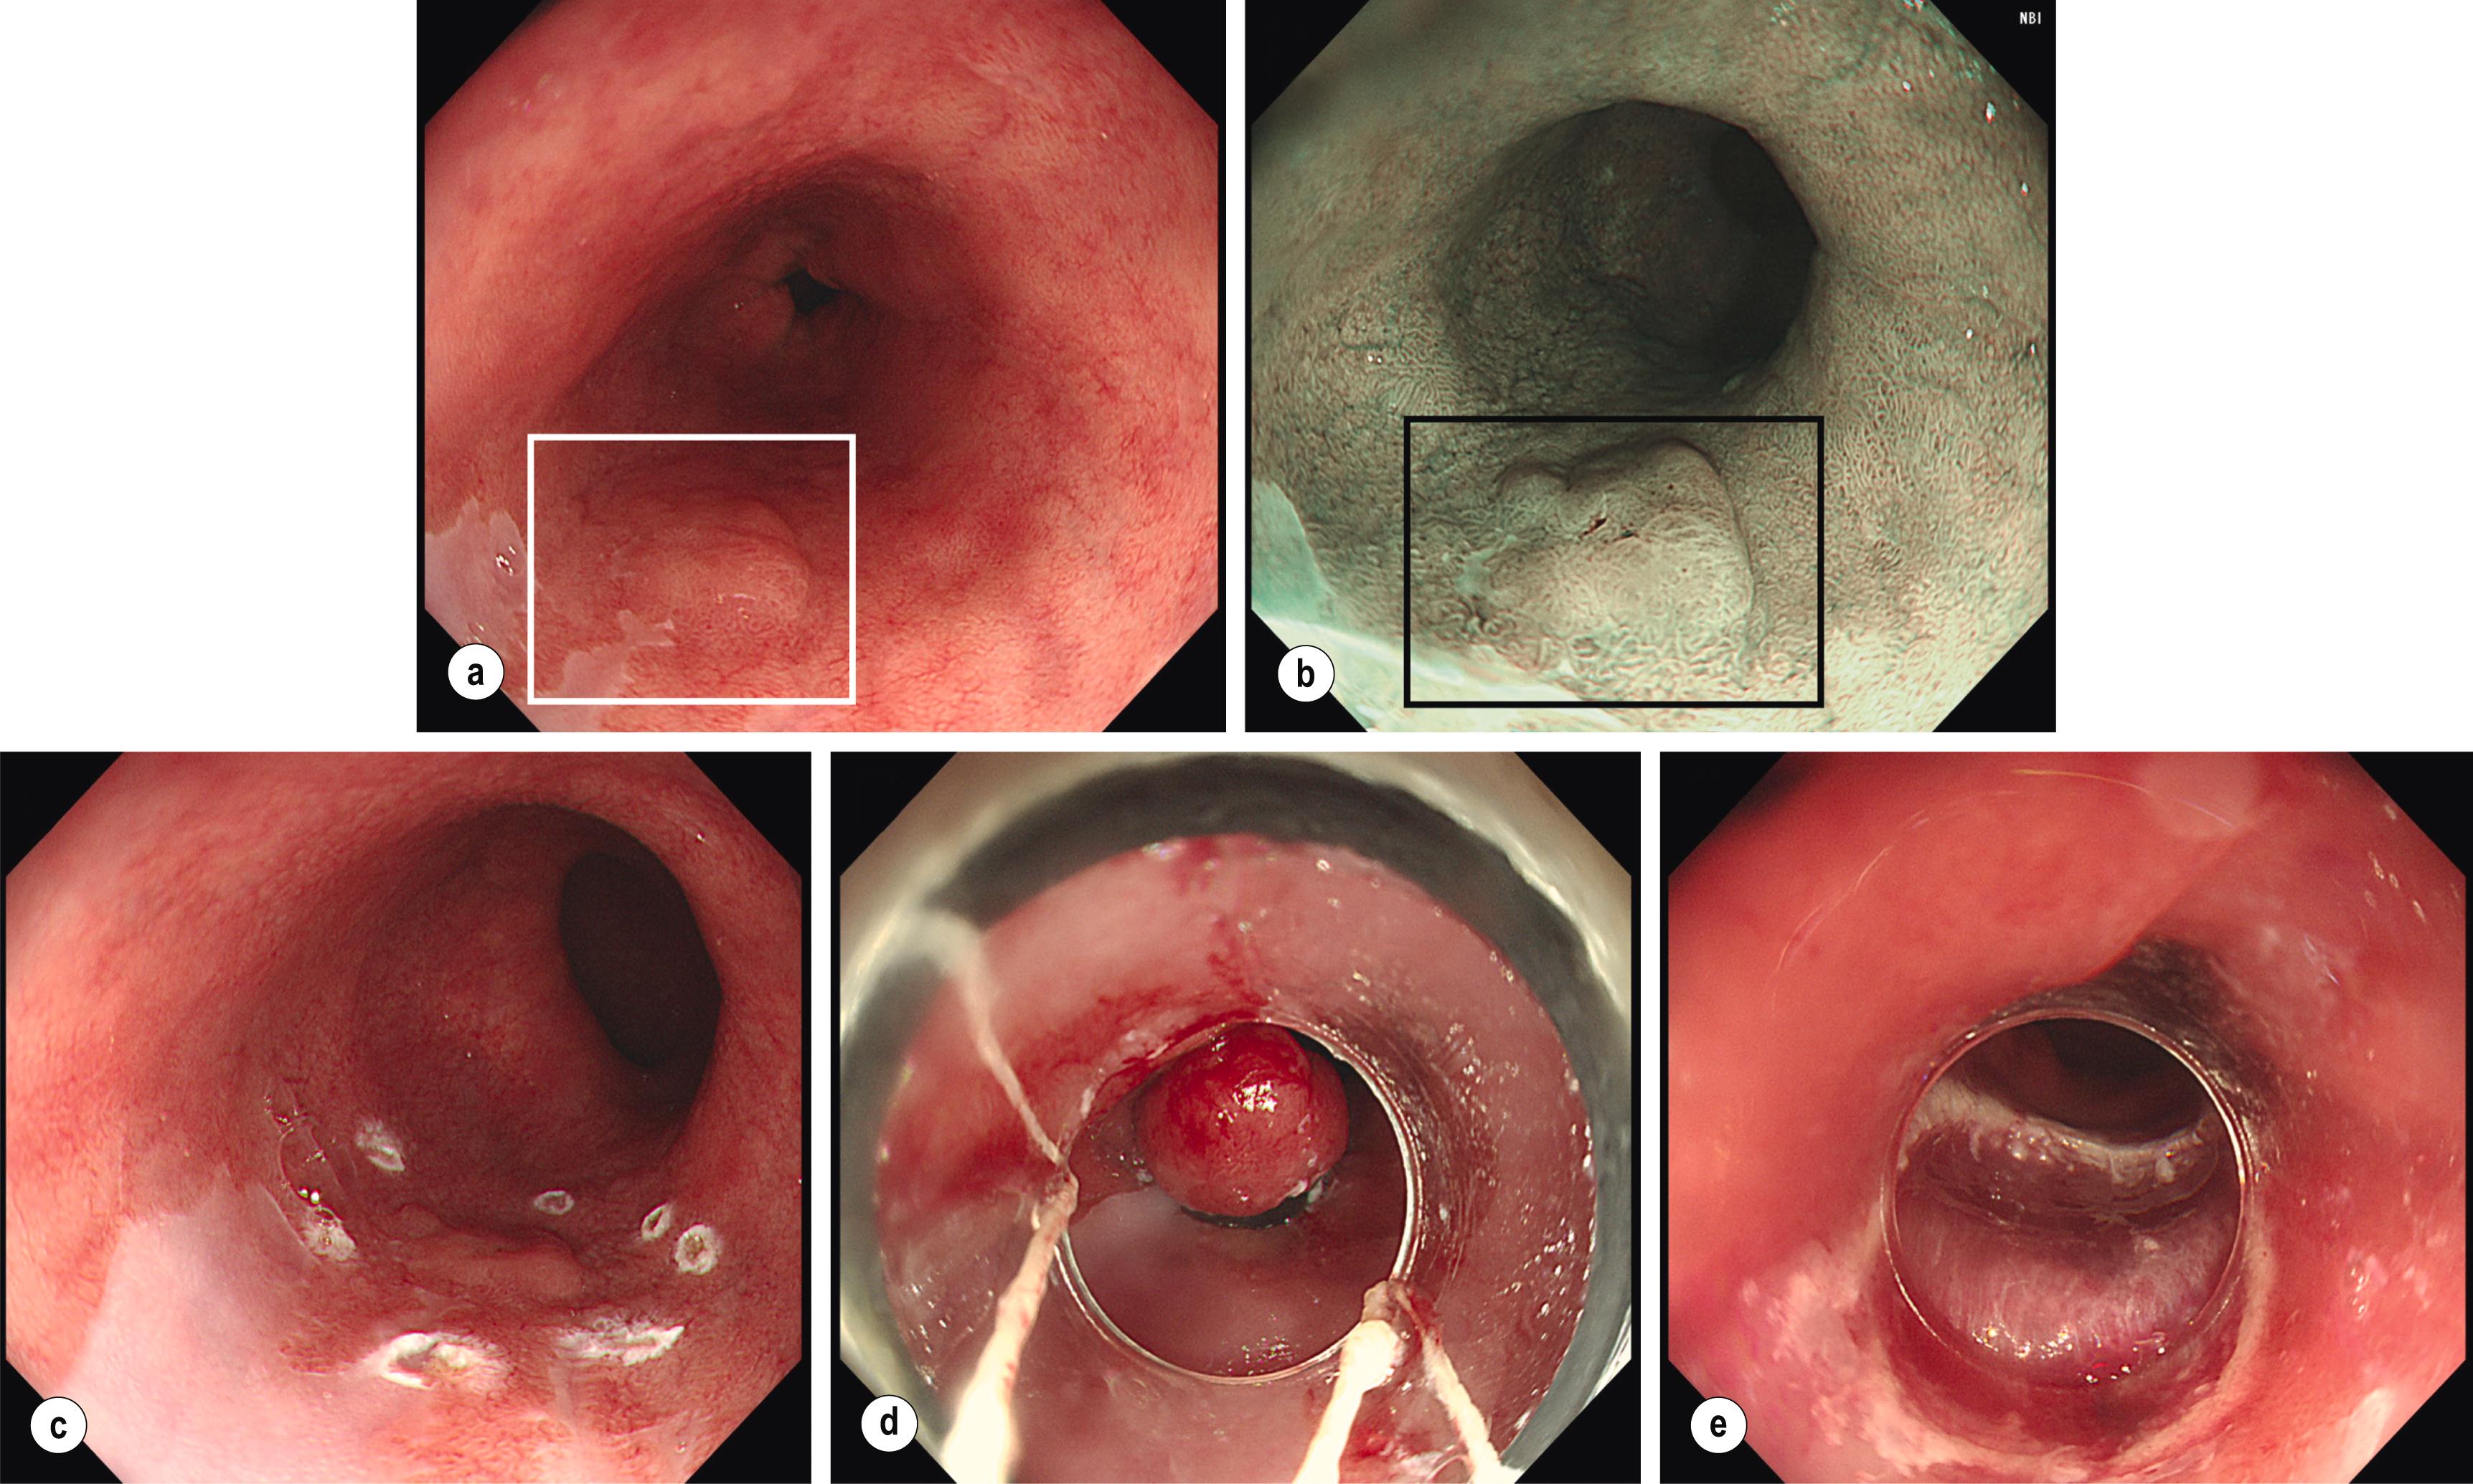 Figure 2.5, Detection, assessment and endoscopic treatment of superficial neoplastic lesion in Barrett’s oesophagus (BO). (a) White light endoscopy (WLE) of a BO segment with a superficial, slightly elevated (Paris 0–IIa) lesion at 7 o’clock (white box) . (b) Narrow-band imaging of the same area allows better visualisation of the lesion and sharper delination of its margins (black box) . Biopsies showed high-grade dysplasia (HGD), and endoscopic mucosal resection (EMR) was decided. (c) WLE imaging showing the markings made around the HGD lesion in preparation for EMR. (d) WLE imaging of the multiband mucosectomy device with the HGD lesion trapped in the rubber band. (e) WLE imaging of the area following EMR resection of the HGD lesion.